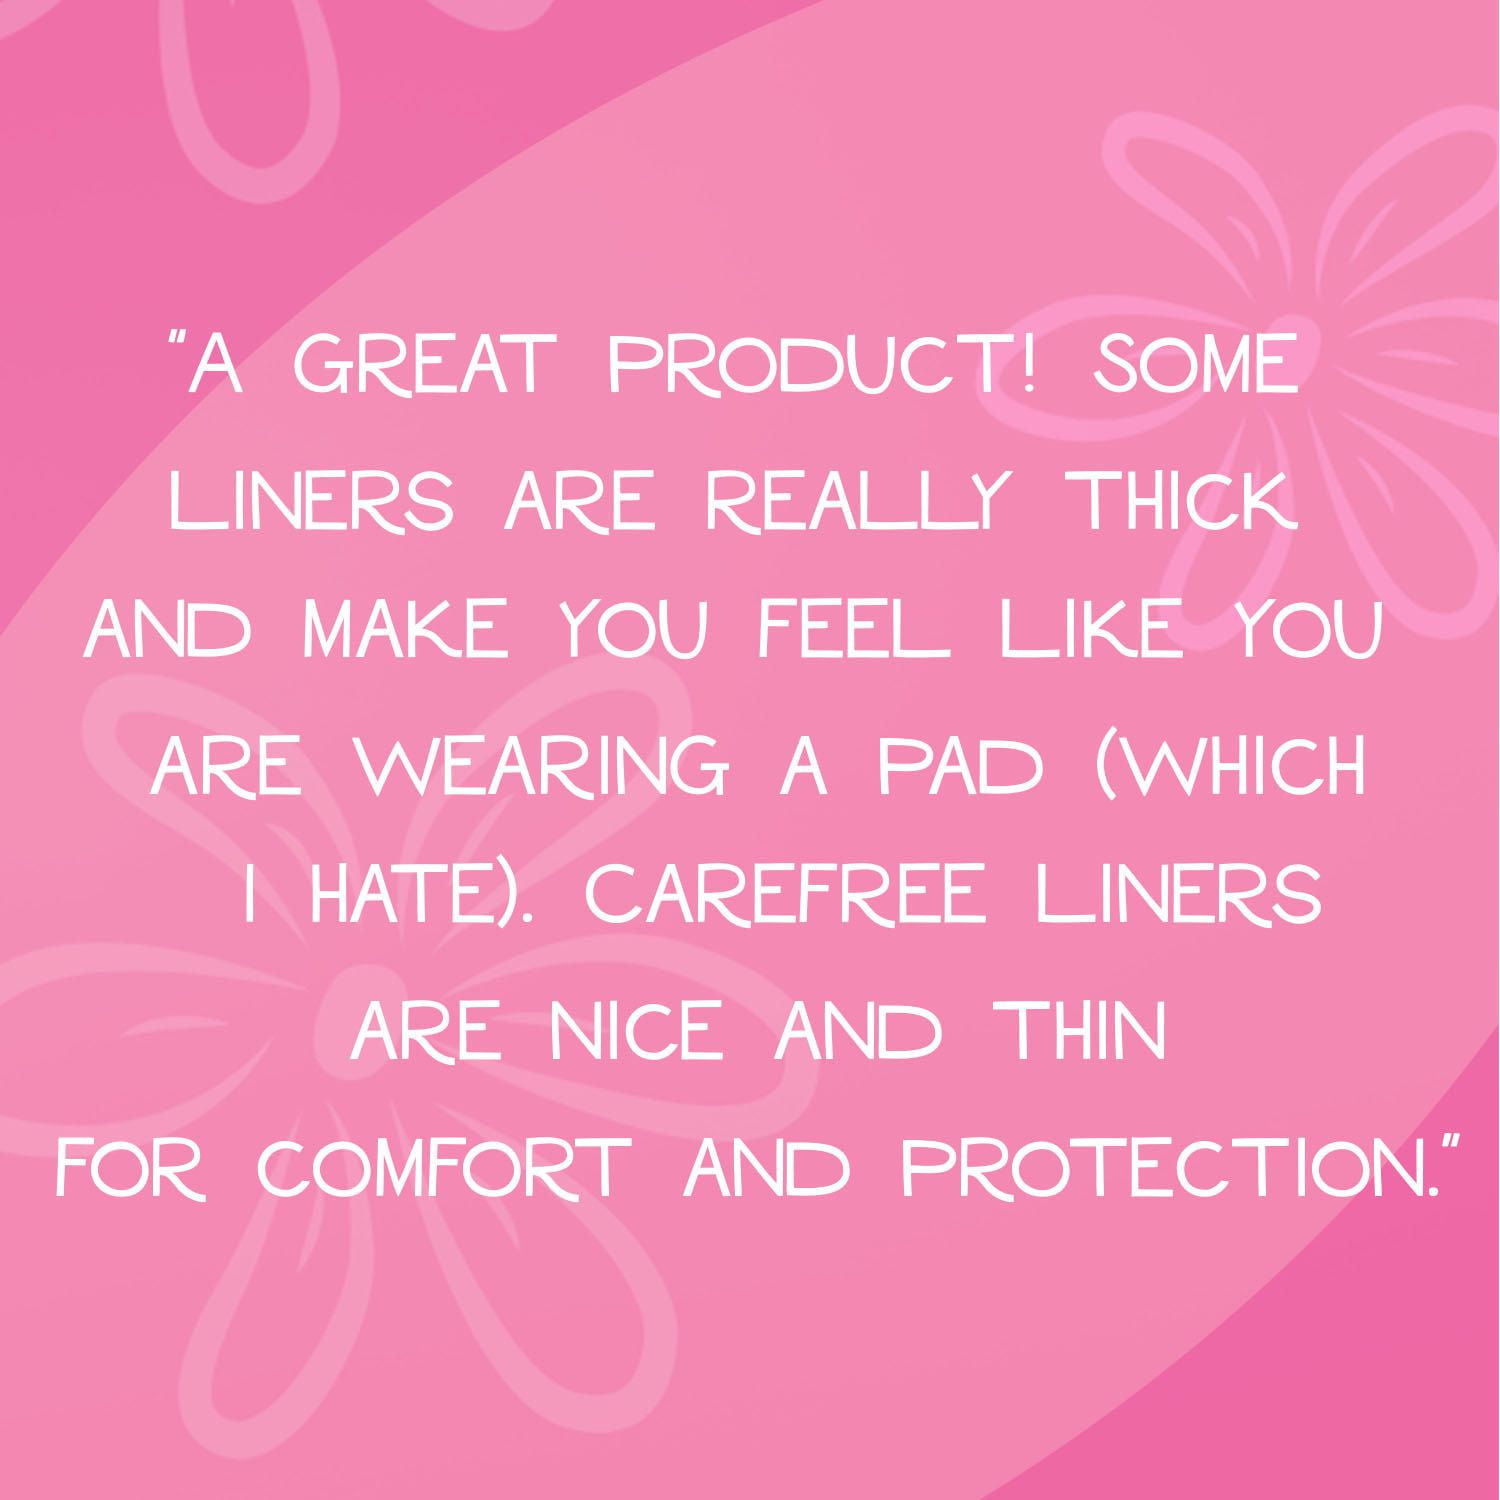 Shop long wrapped liners for more coverage daily – Stayfree & Carefree CA